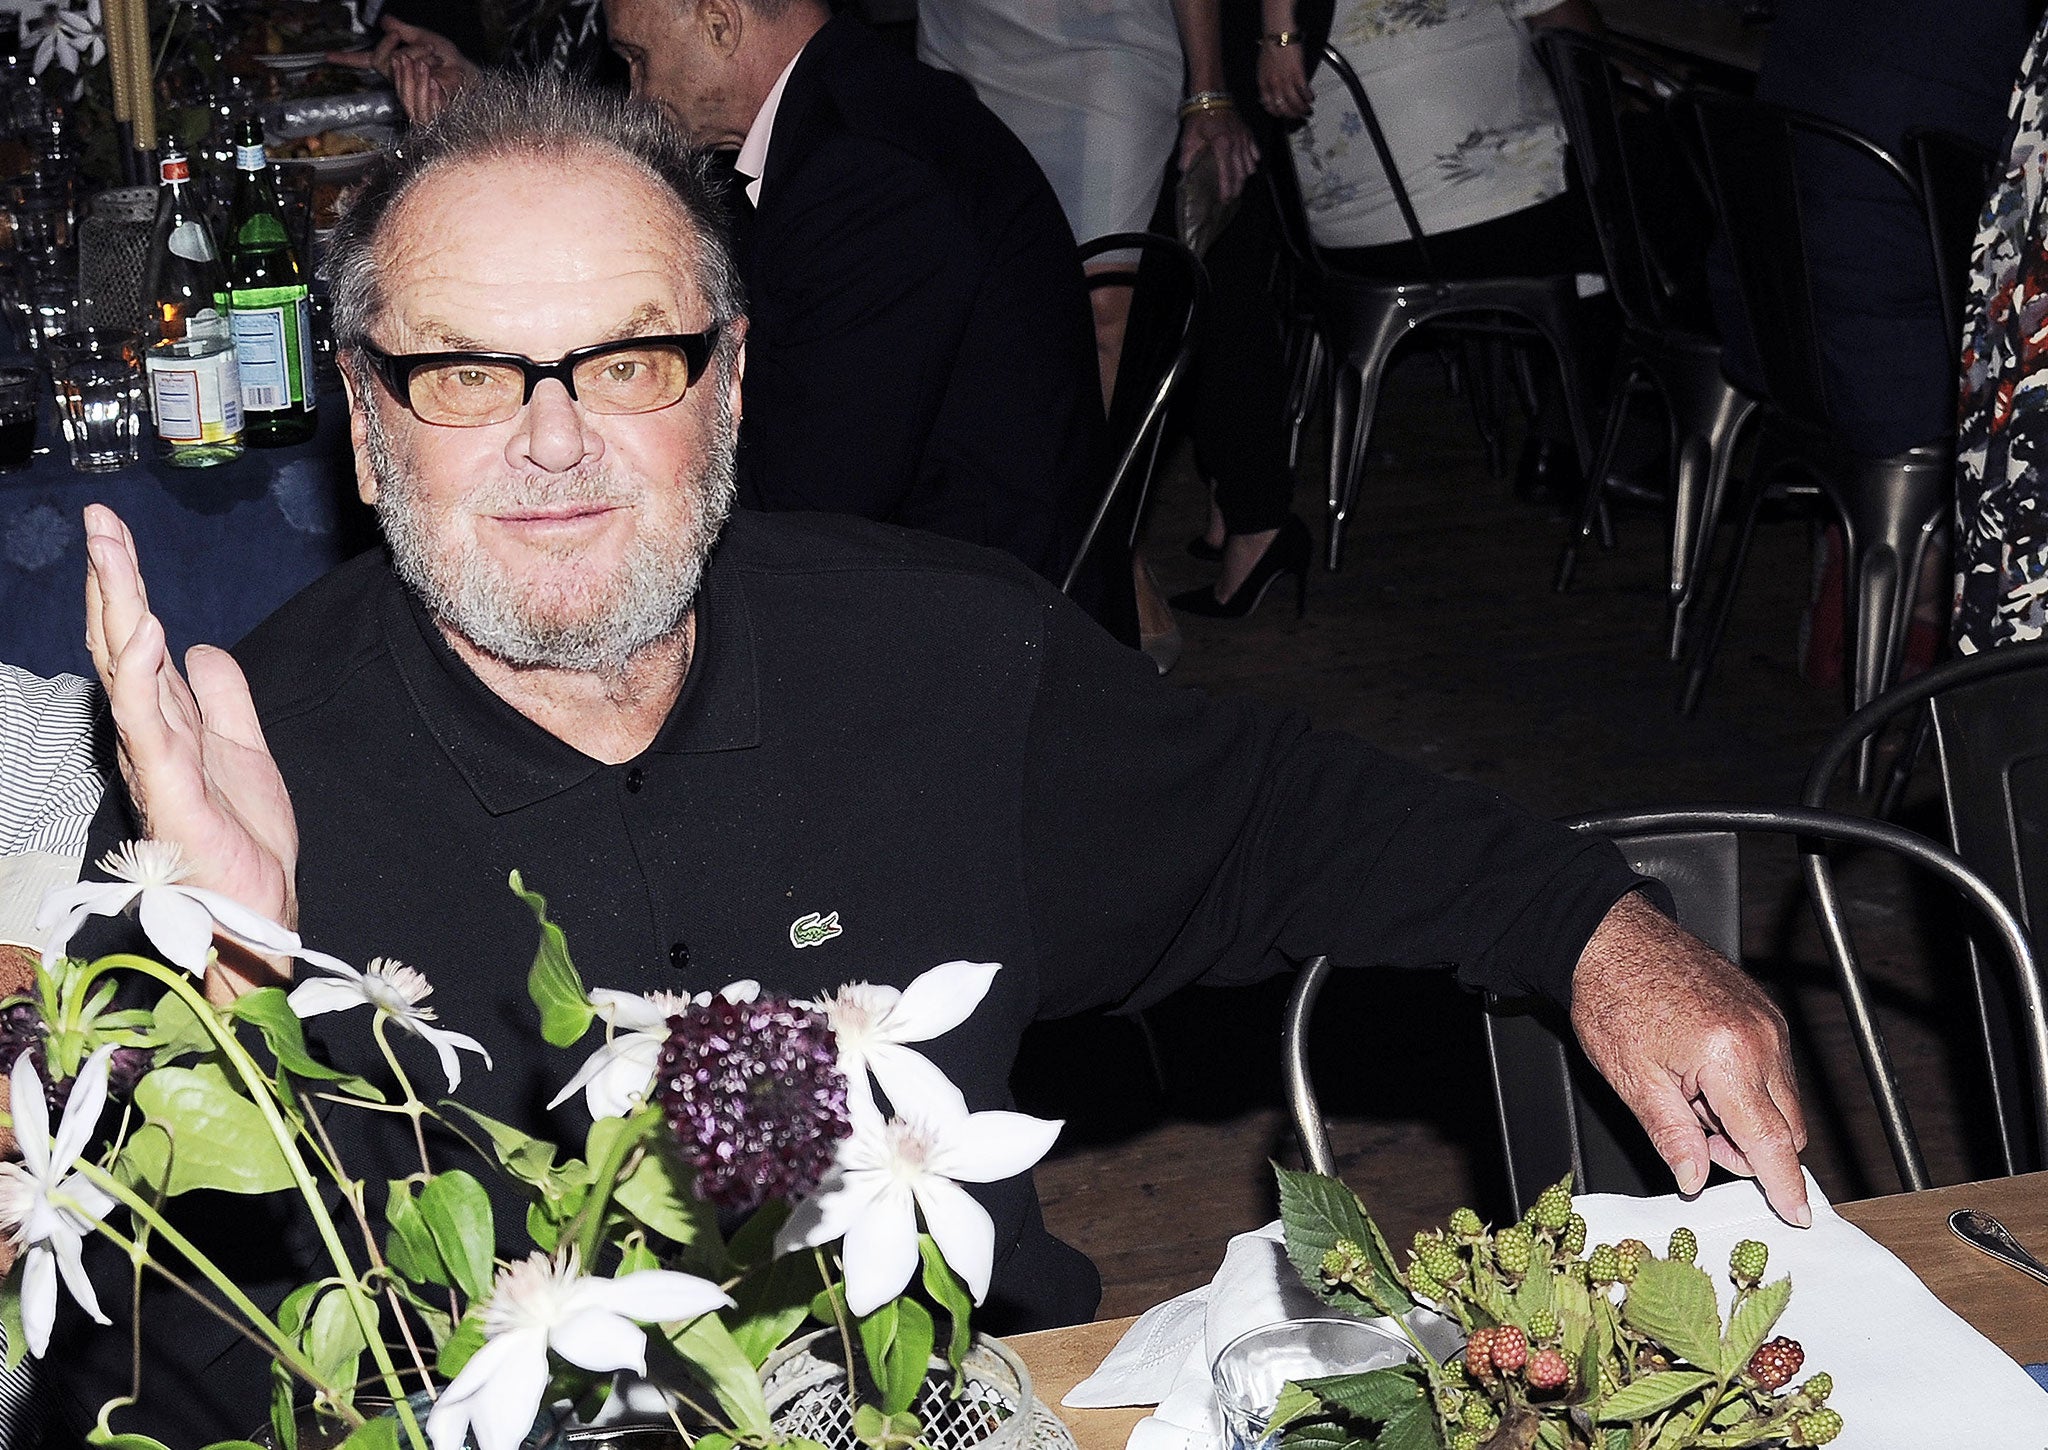 Jack Nicholson at a New York fundraiser in 2014